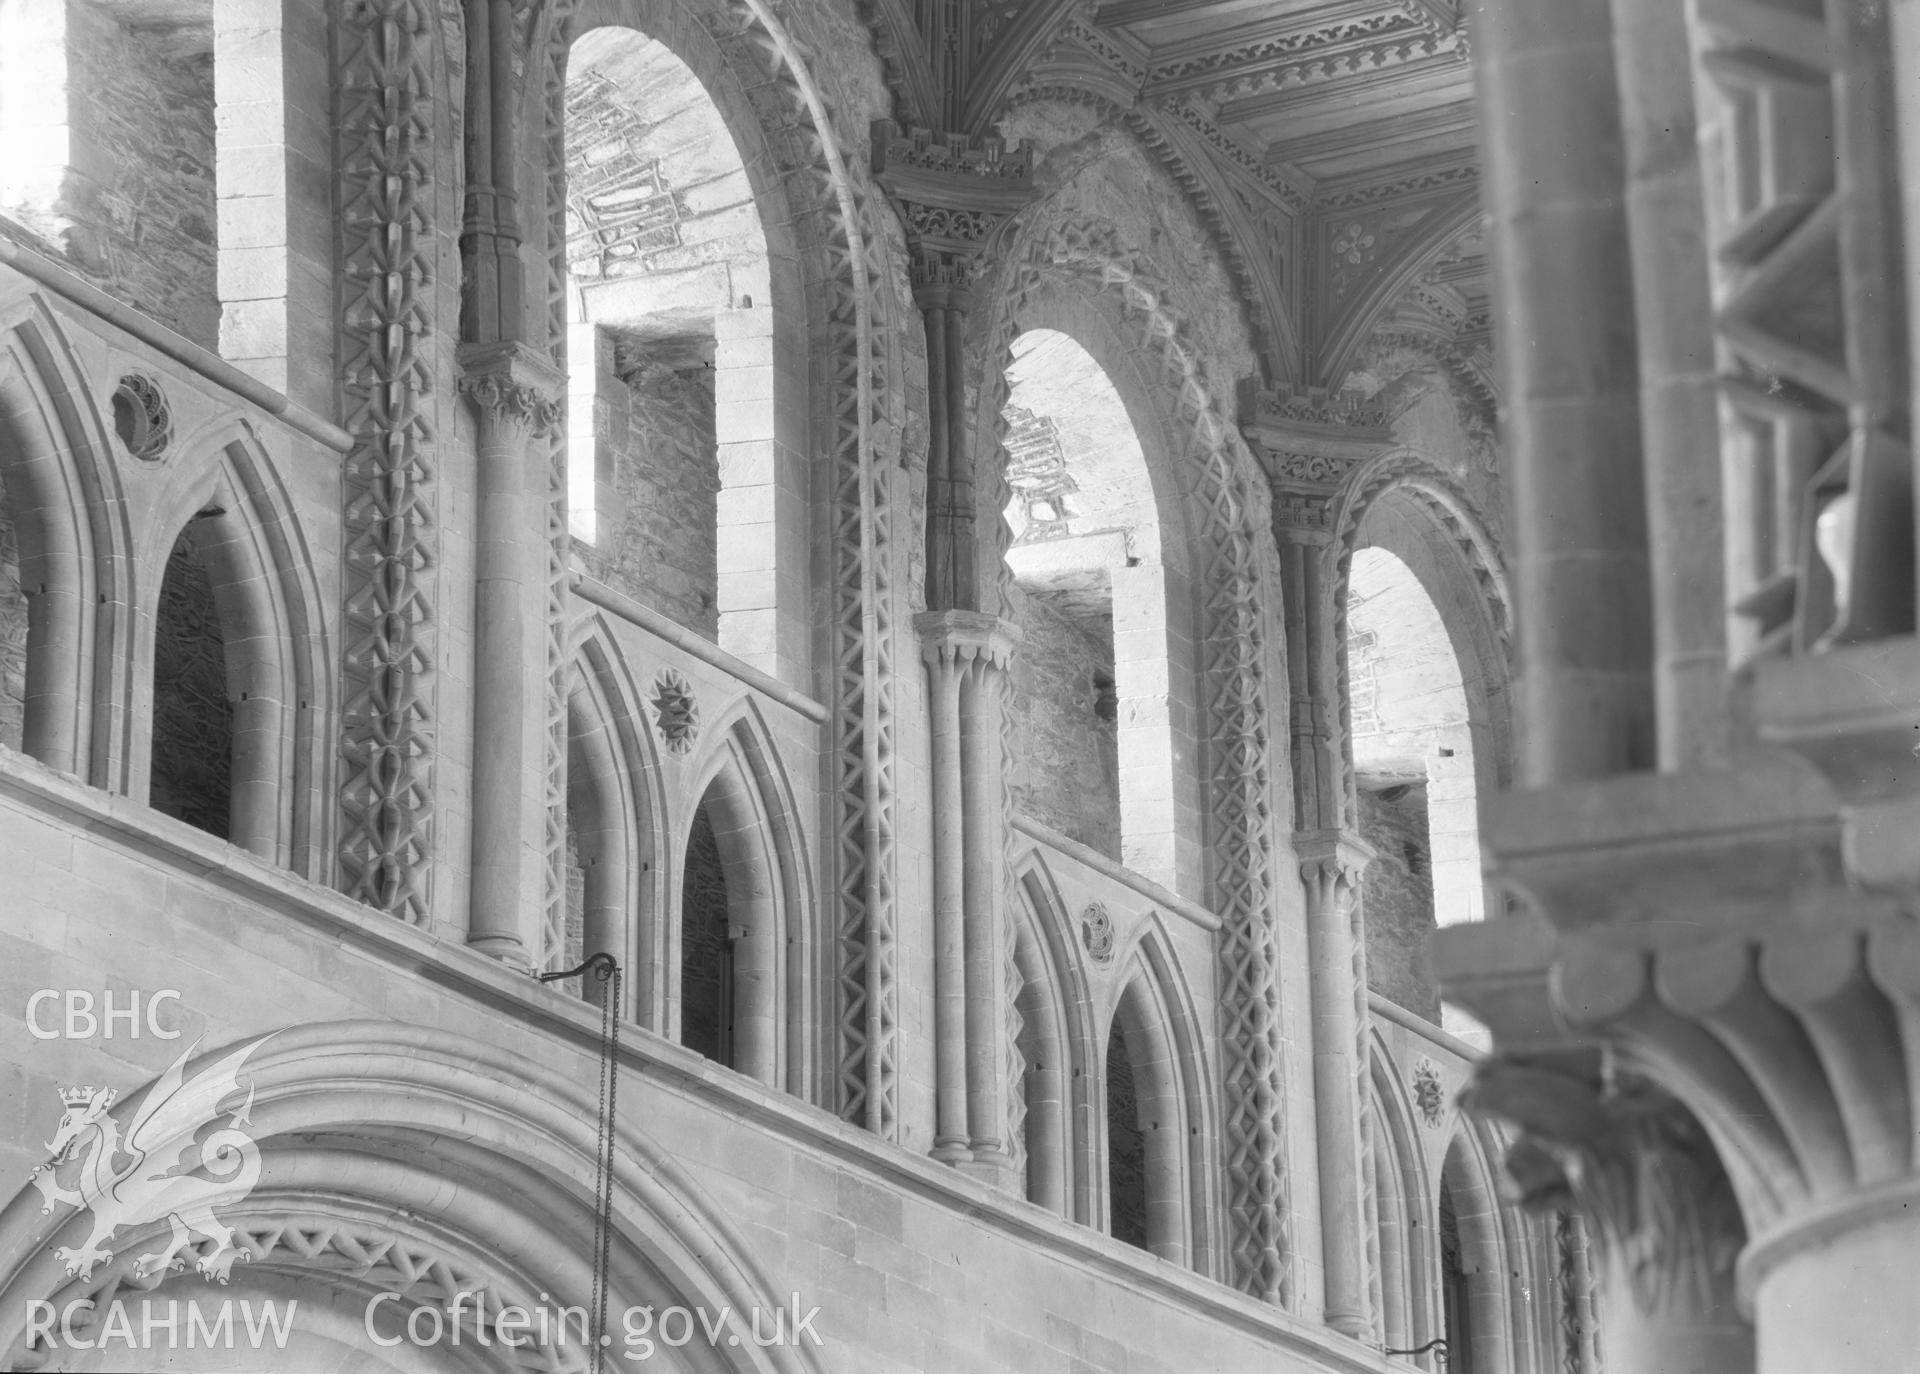 Digital copy of a black and white nitrate negative showing detailed interior view of decorated window arches at St. David's Cathedral, taken by E.W. Lovegrove, July 1936.